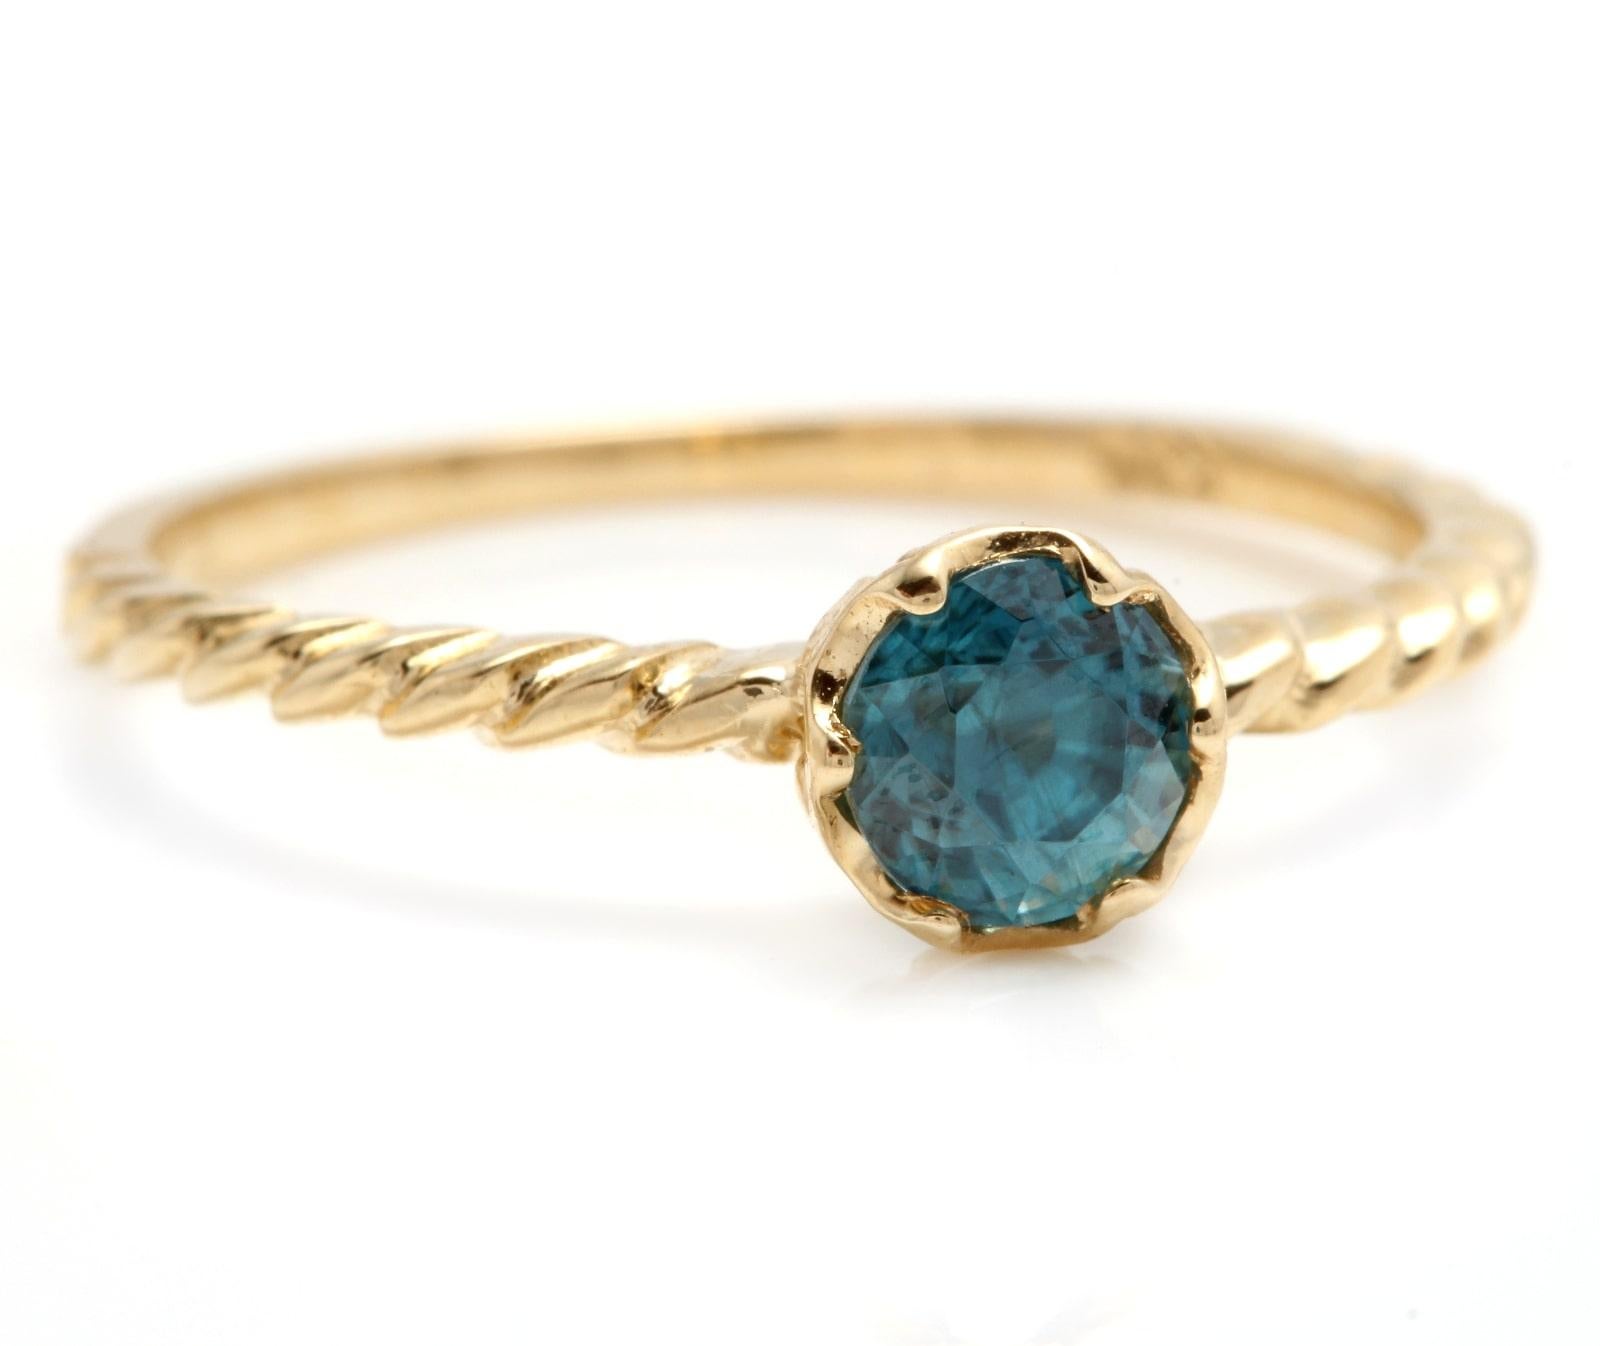 Beautiful Natural Blue Zircon 14K Solid Yellow Gold Ring

Total Natural Round Shaped Zircon Weights: Approx. 0.90 Carats 

Zircon Measures: Approx. 5.00mm

Ring size: 7 (free re-sizing available)

Ring total weight: Approx. 1.5 grams

Disclaimer: